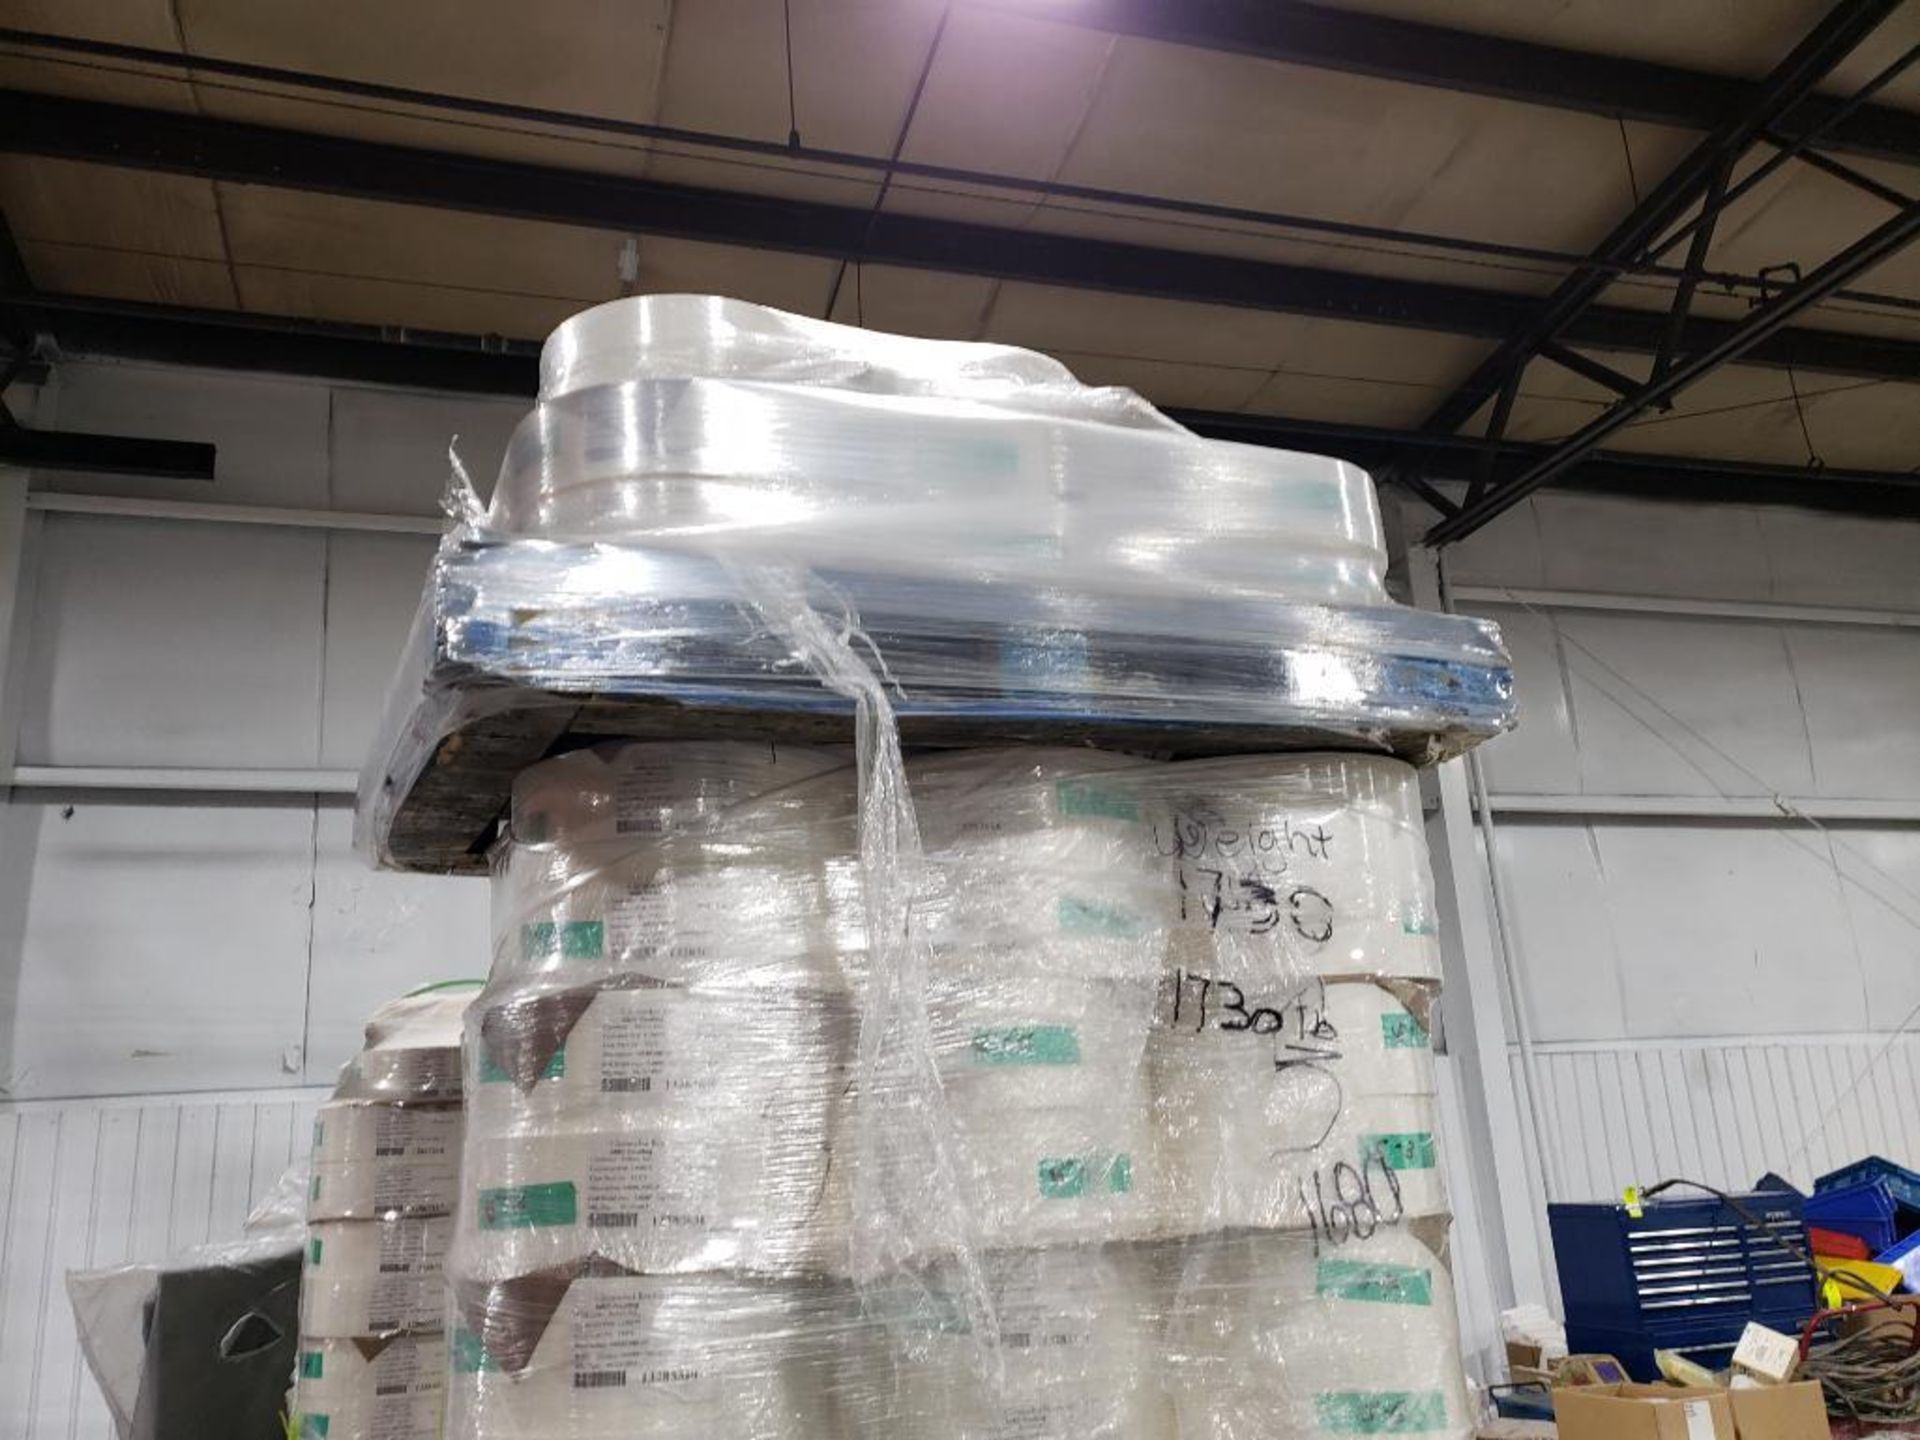 Qty 3 - Pallets of backer paper. Large qty of rolls. Could be used for packing material. - Image 2 of 6